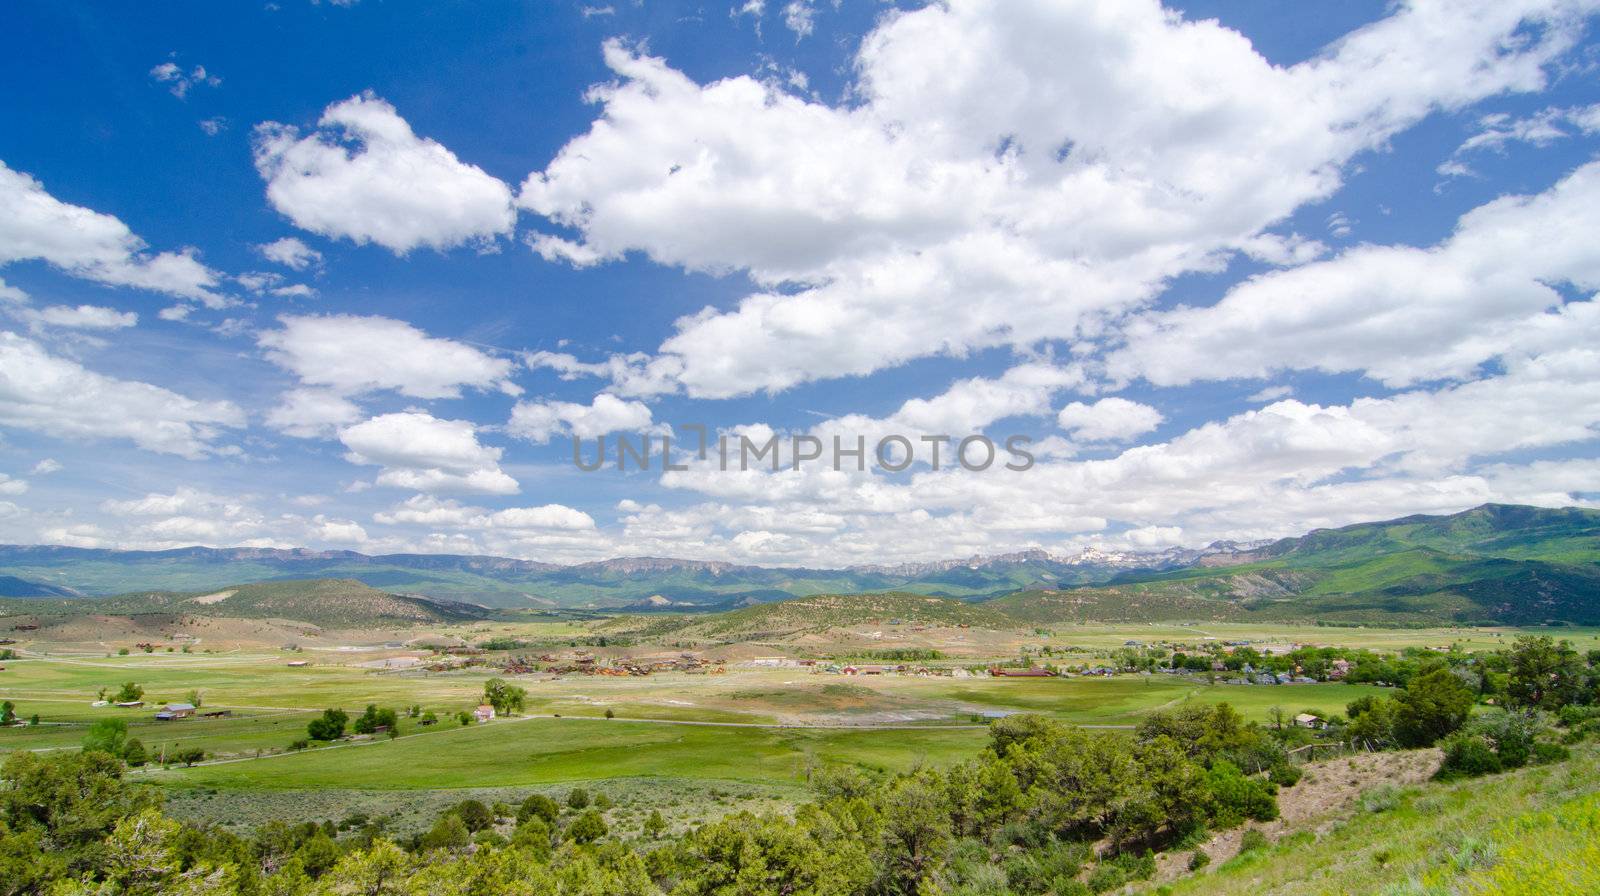 Rural Farming Valley in the Foothills of the San Juan Mountains in Colorado by robert.bohrer25@gmail.com